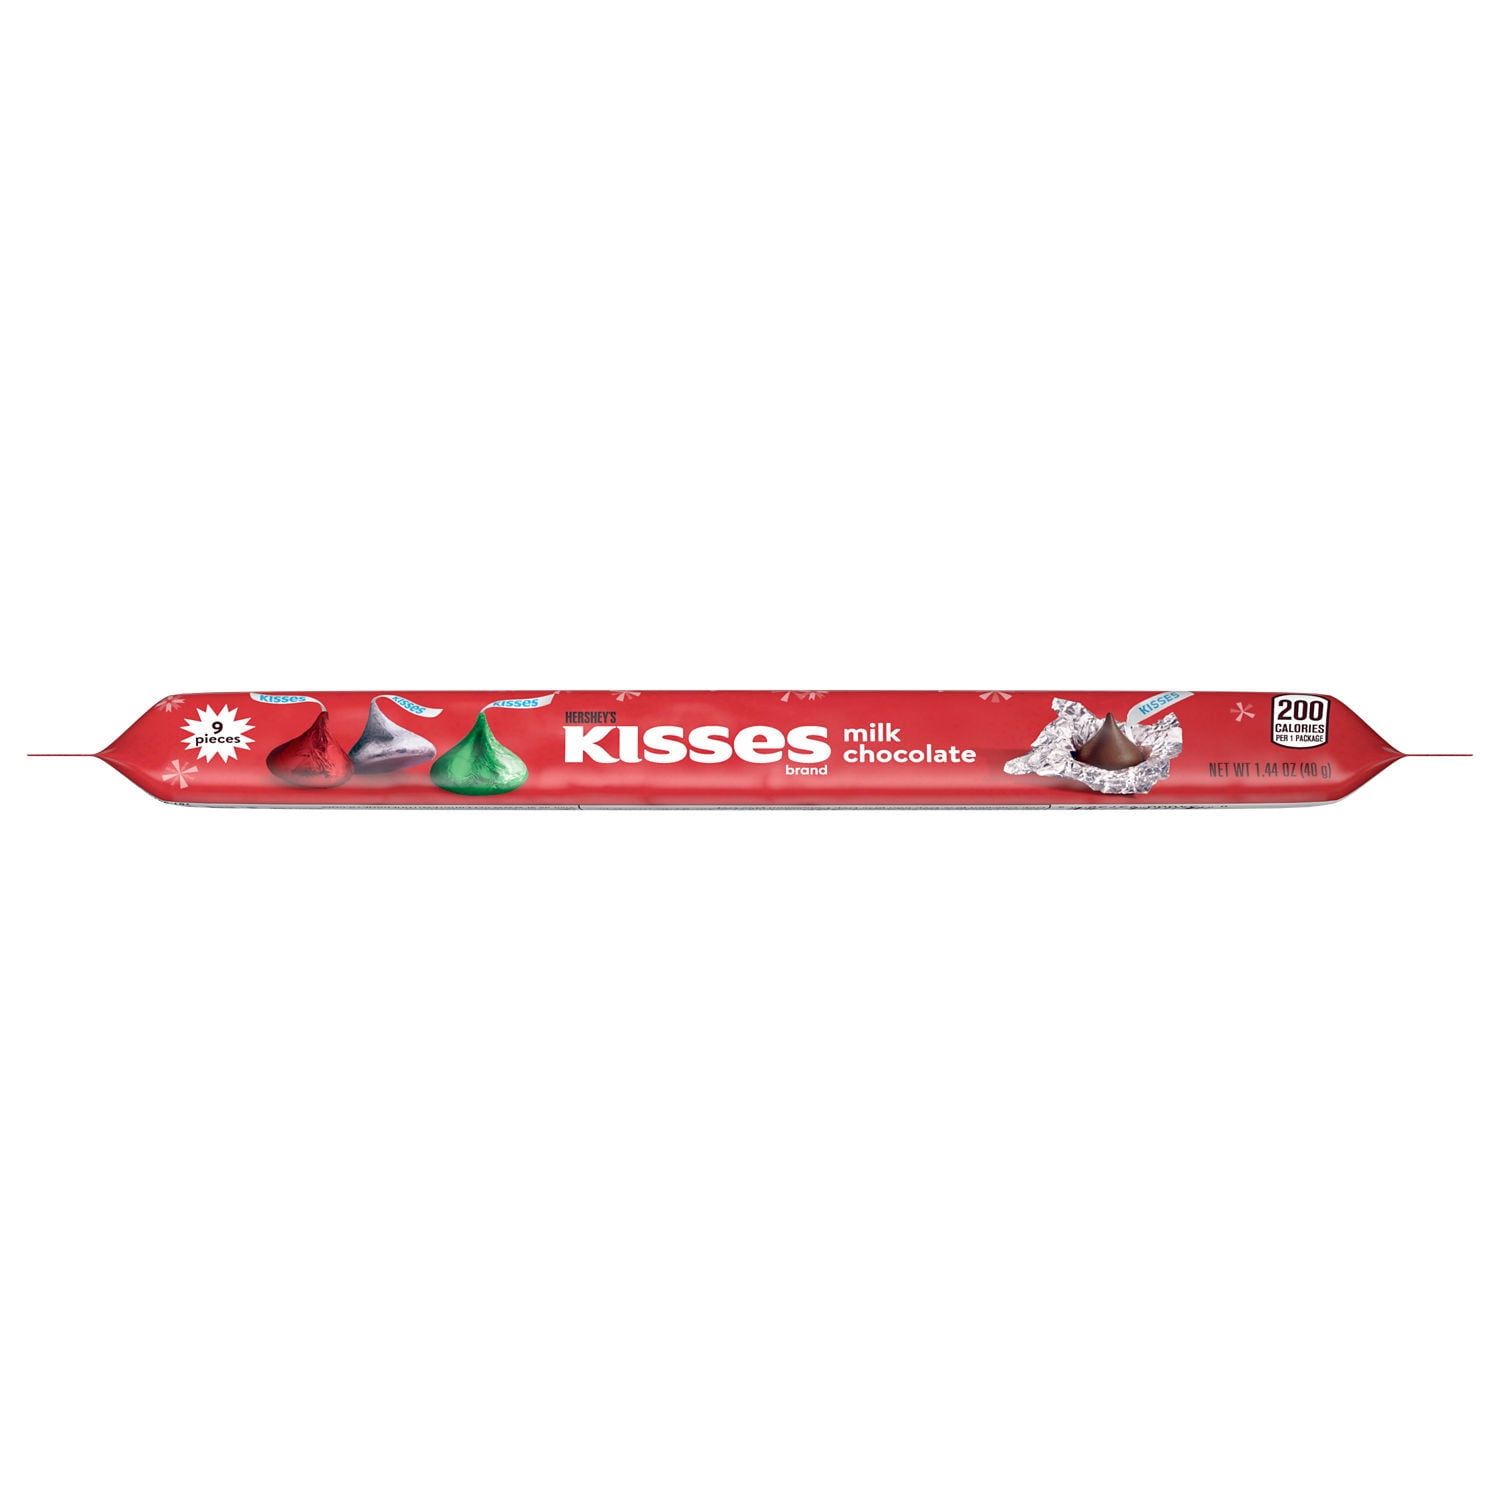 HERSHEY'S KISSES HERSHEY'S, KISSES Milk Chocolate Candy, Christmas, 1.44 oz, Pack (9 Pieces)